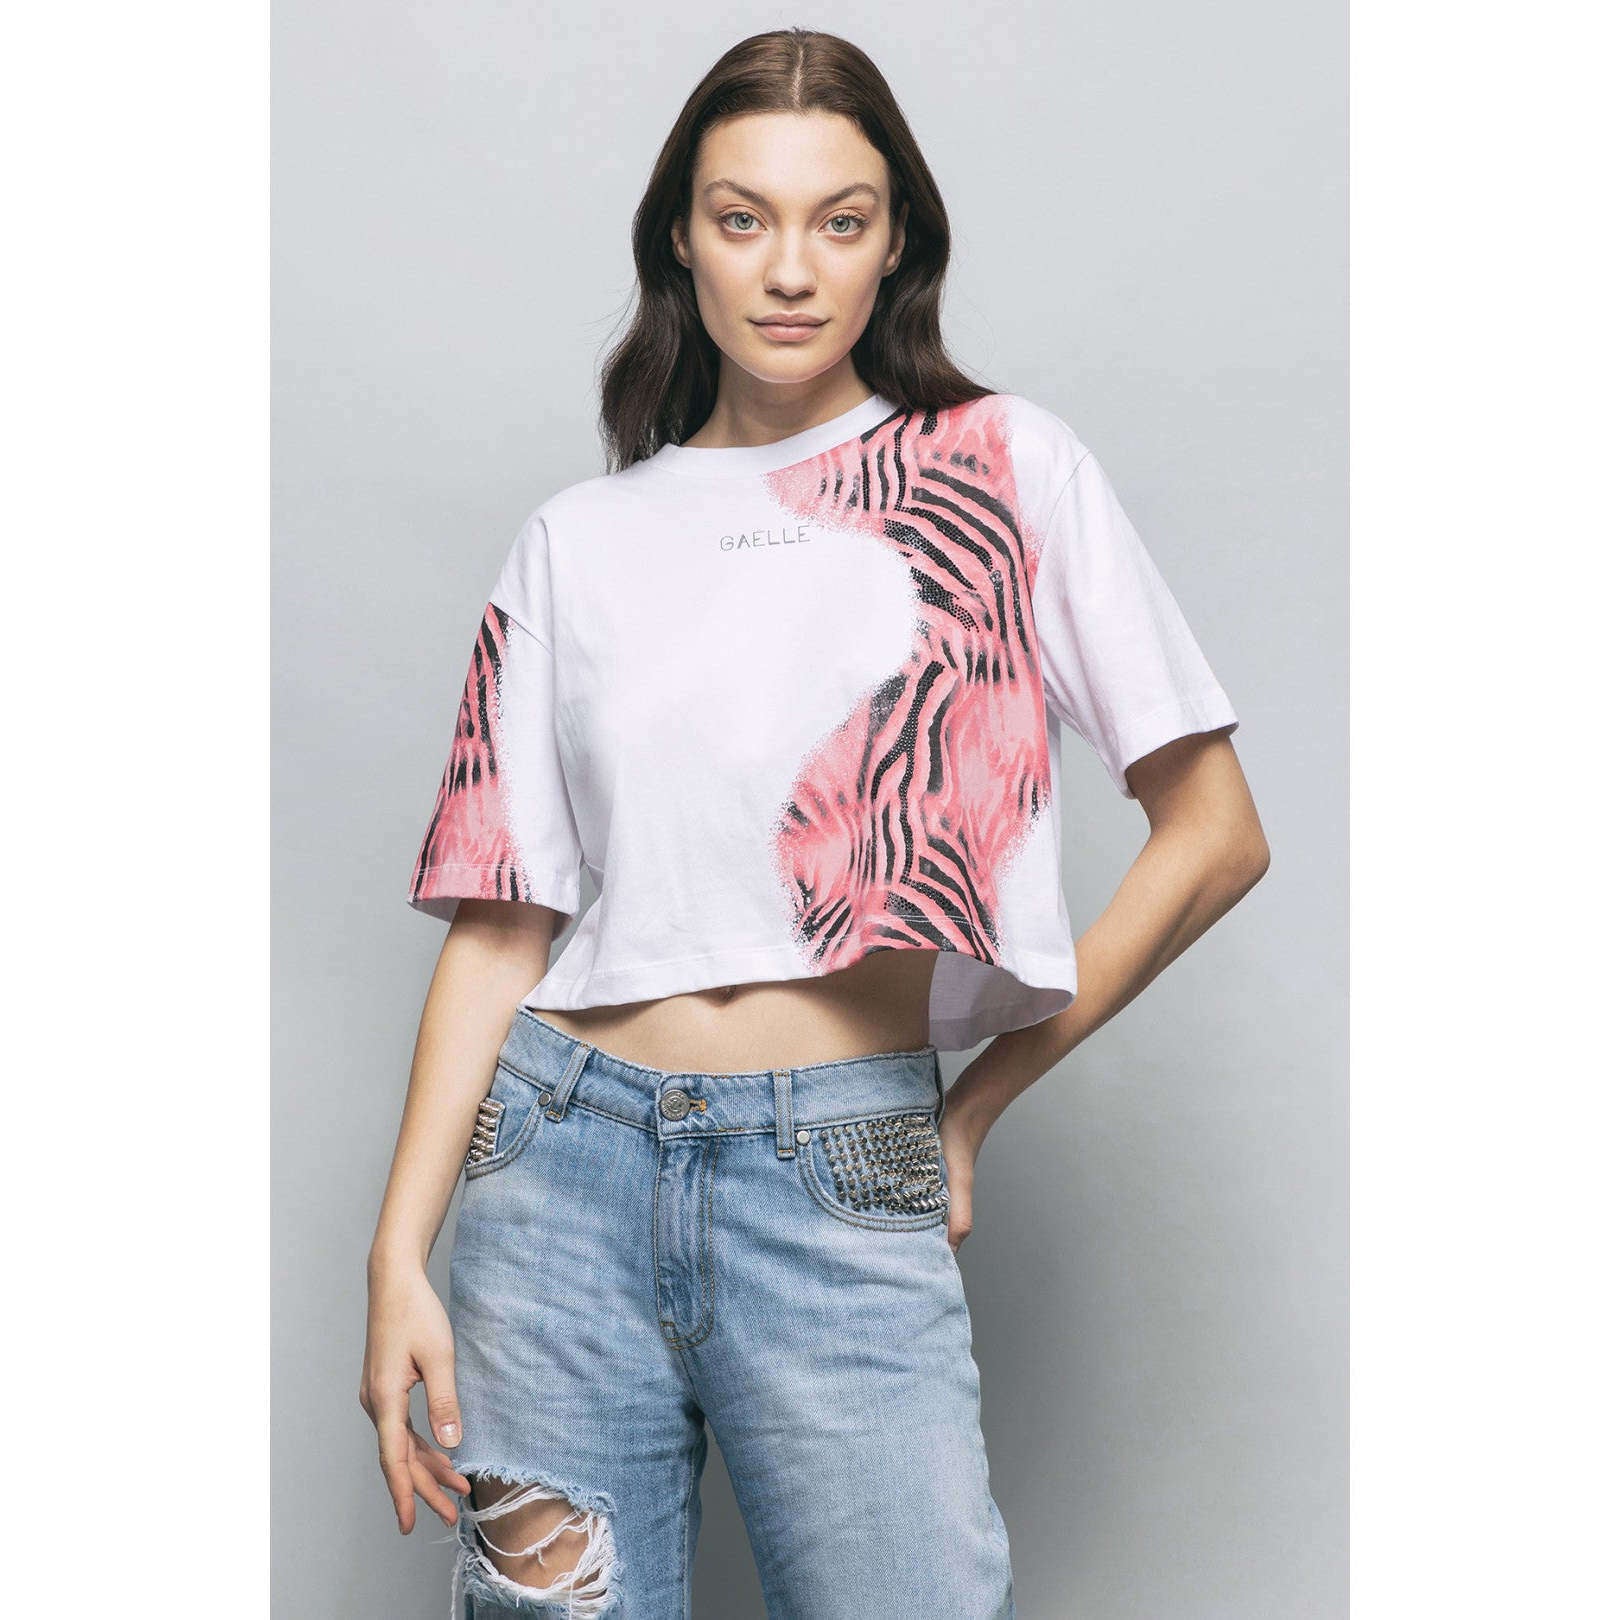 Gaelle Donna T-shirt Bianca con Stampa Rosa Cropped GBDP17071